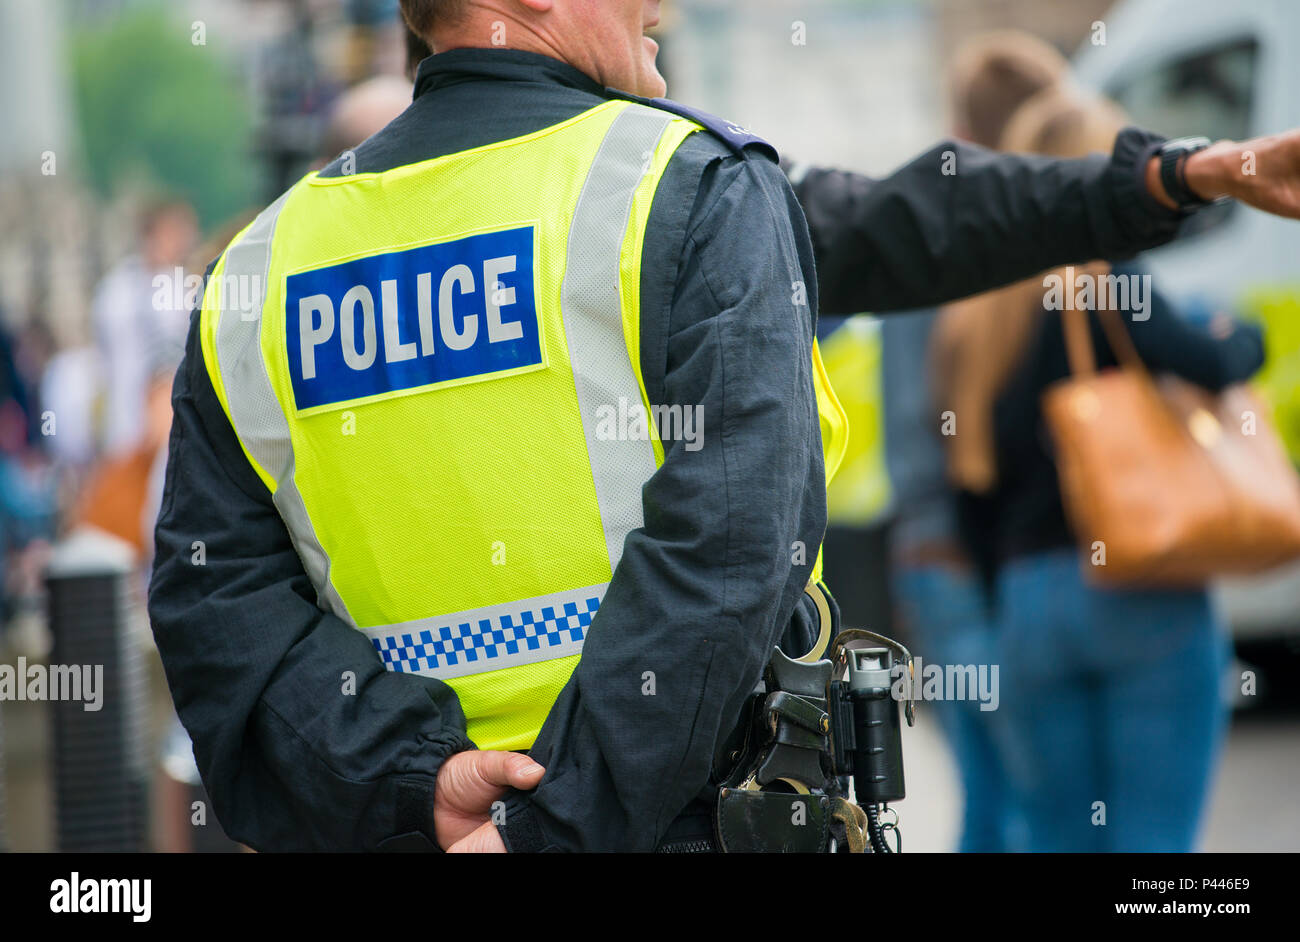 Metropolitan police officer wearing high visibility vest with POLICE printed on the back, while on duty in London, UK. Stock Photo